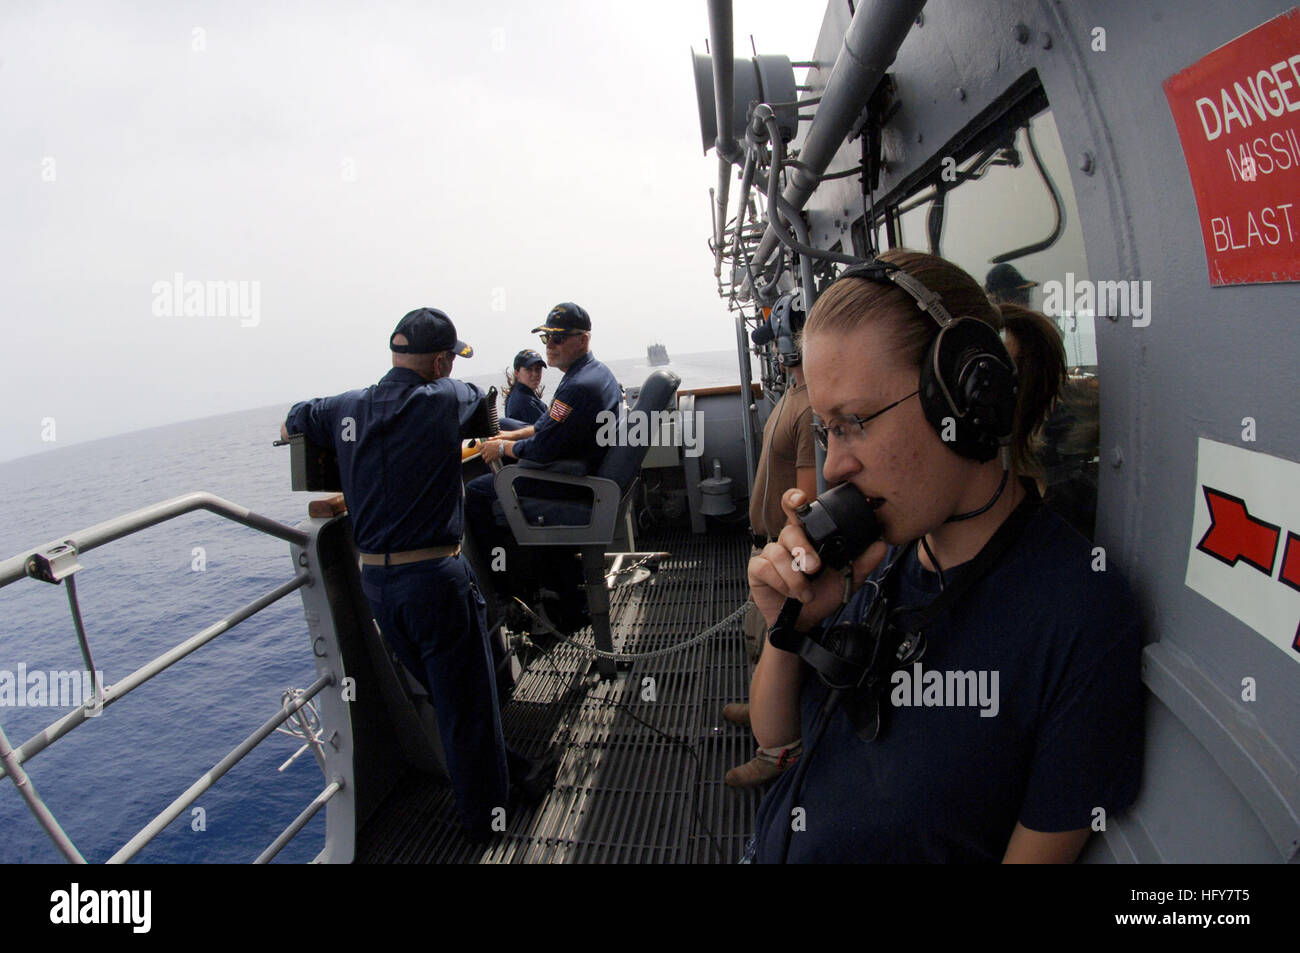 100603-N-0553R-059 GULF OF ADEN (June 3, 2010) Yeoman Seaman Britanny Engbrecht, embarked aboard the guided-missile cruiser USS San Jacinto (CG 56), conducts a communications check as the ship prepares to come alongside the Military Sealift Command dry cargo and ammunition ship USNS Robert E. Peary (T-AKE 5) to conduct a replenishment at sea. San Jacinto is part of Combined Task Force 151, a multinational task force established in January 2009 to conduct counter-piracy operations. Combined Task Force 151 operates in the Gulf of Aden and the east coast of Somalia. (U.S. Navy photo by Mass Commu Stock Photo